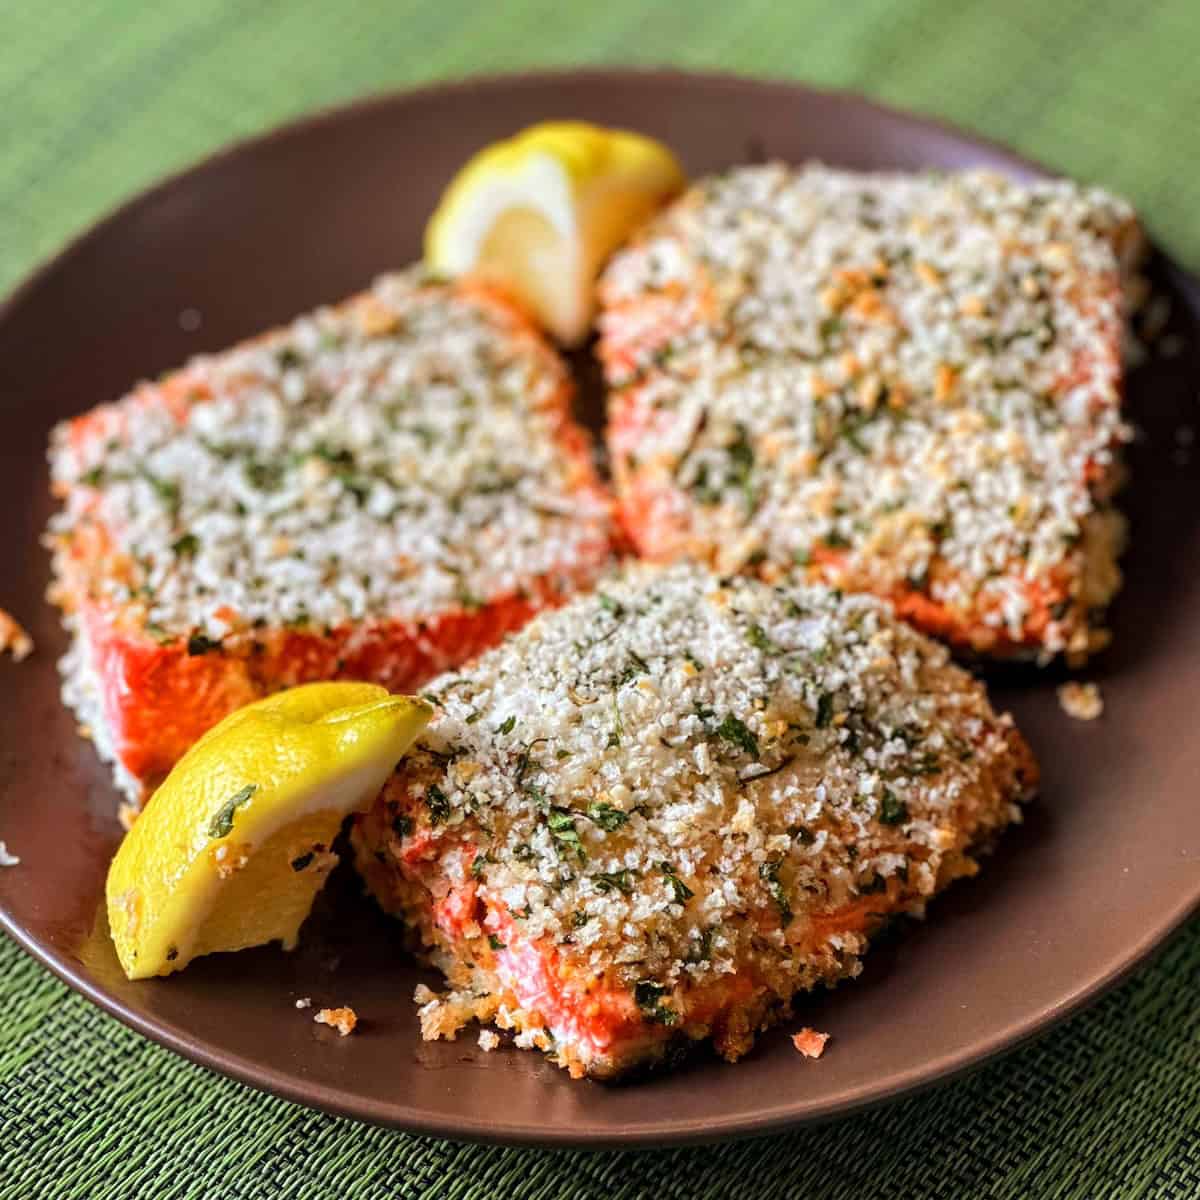 3 fillets of salmon encrusted with panko next to lemon wedges on brown plate on green placemat